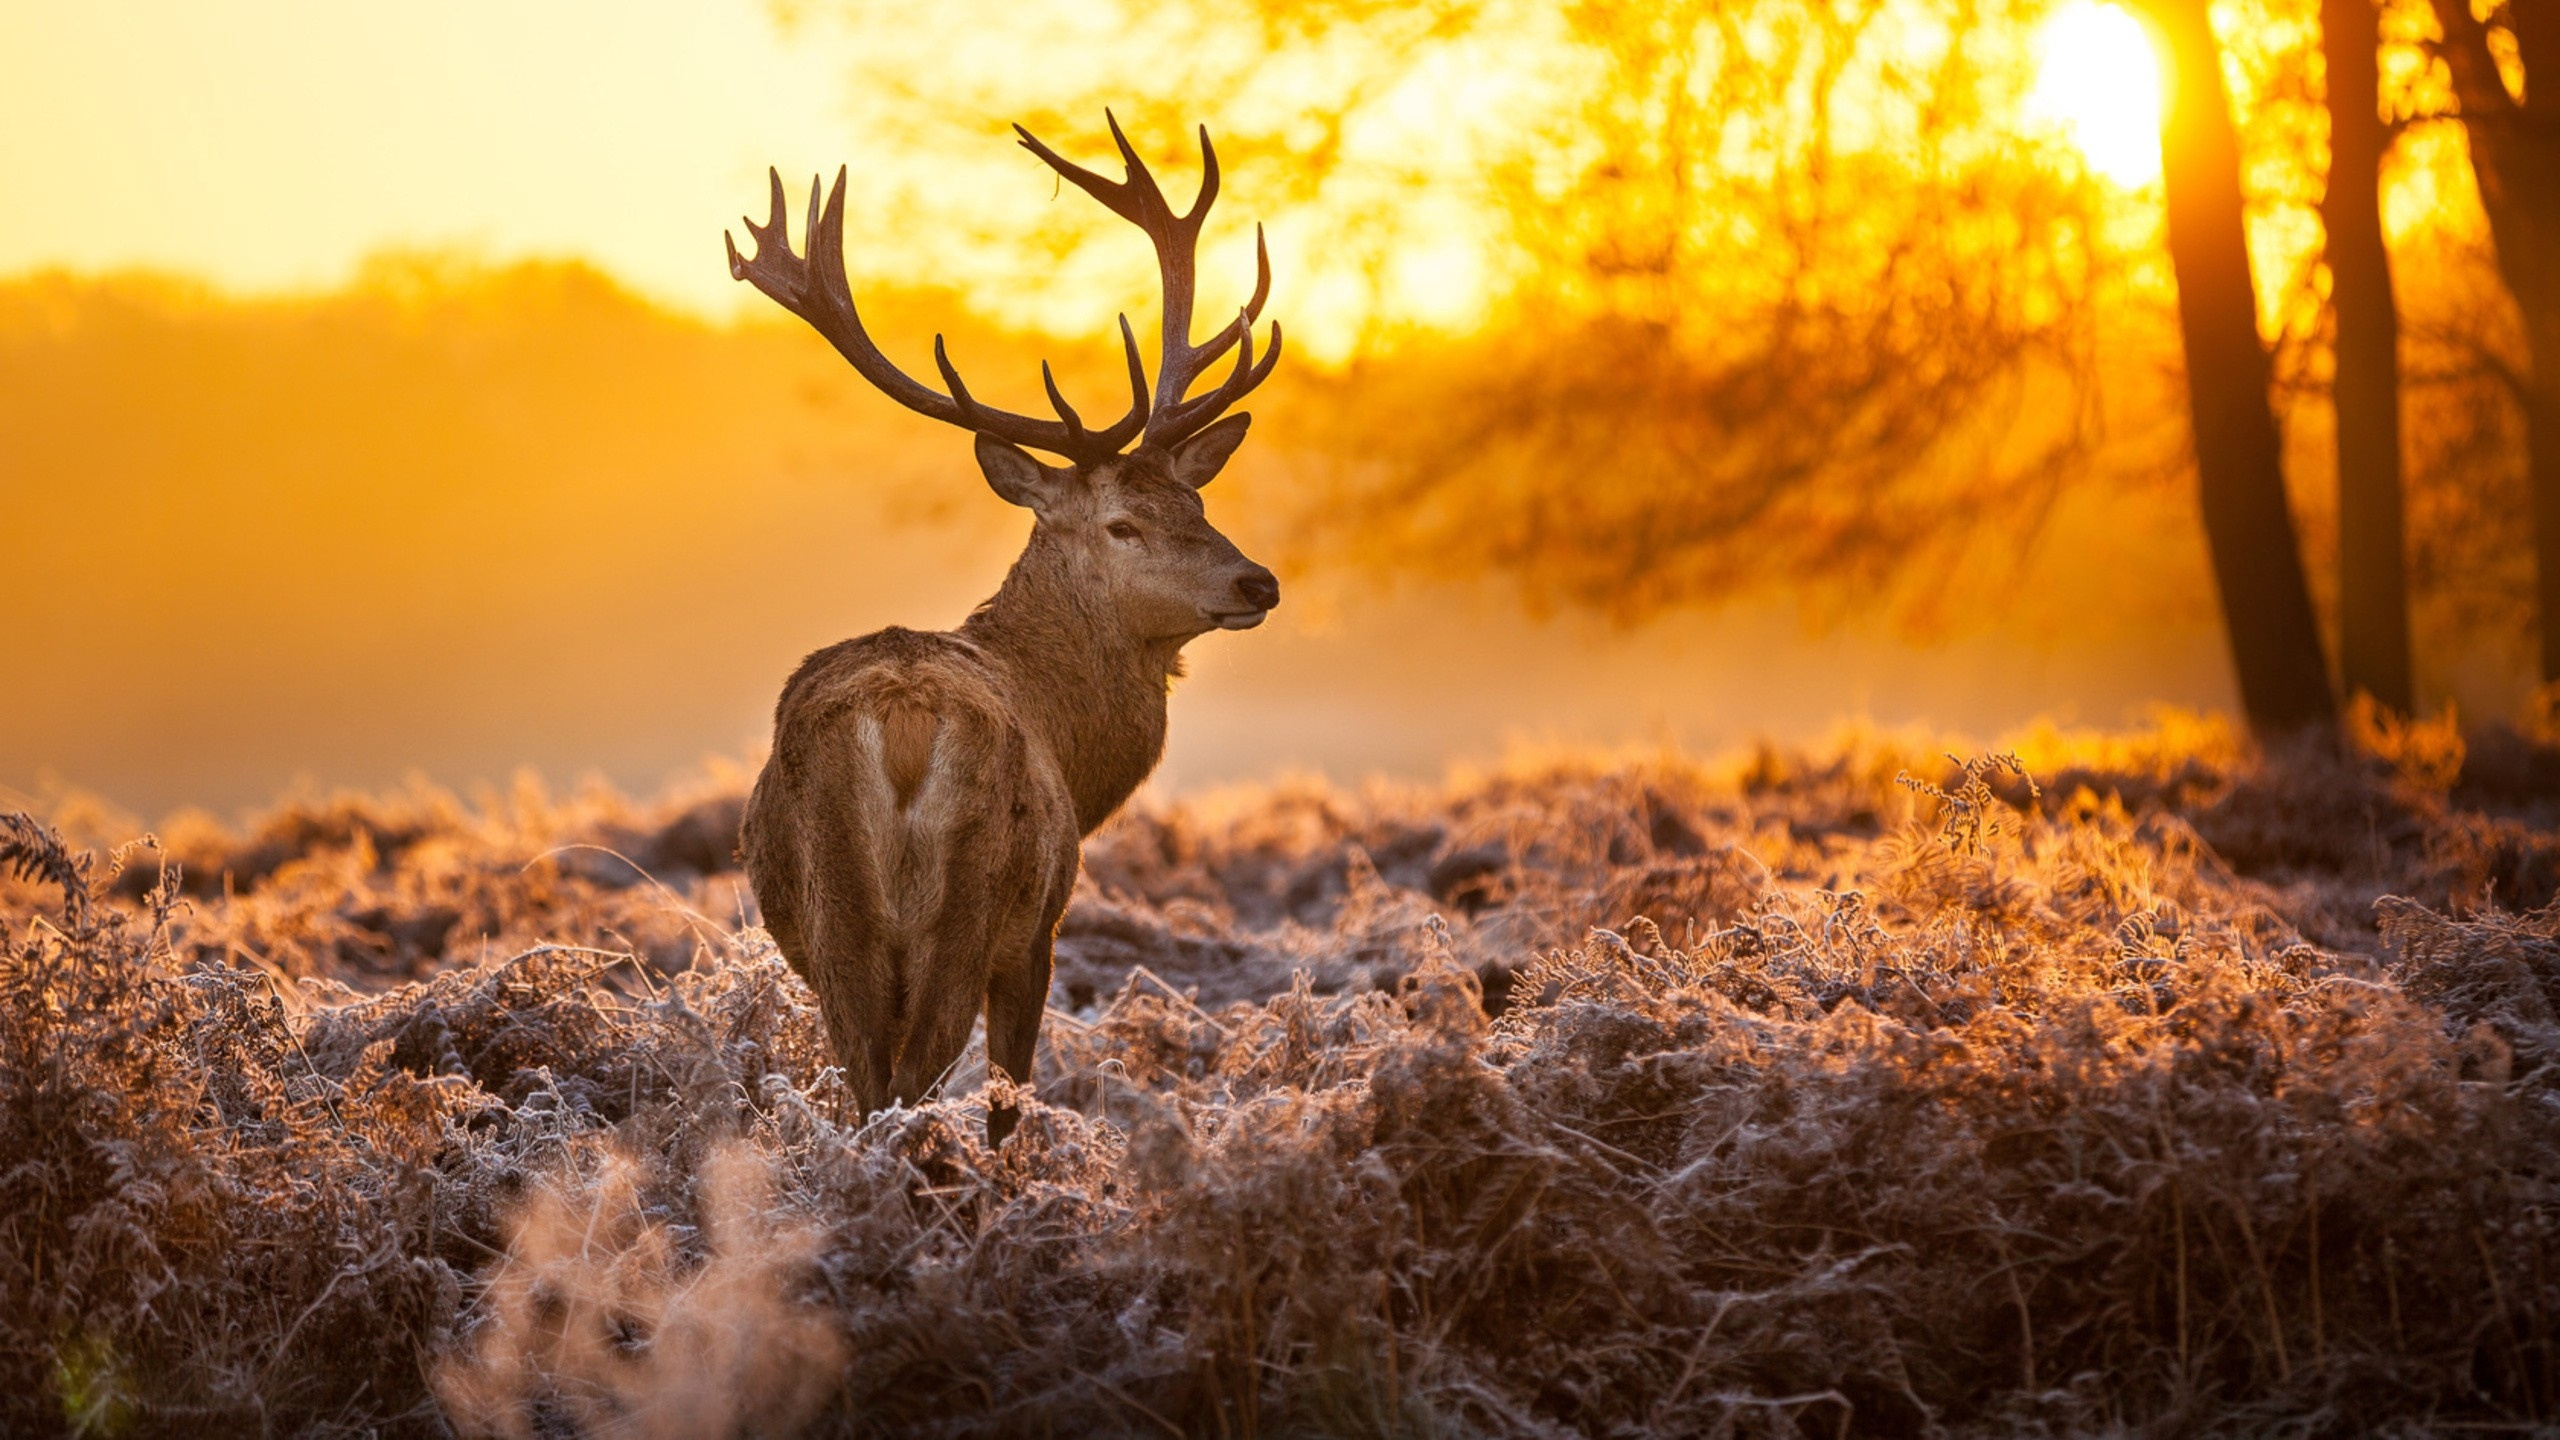 Brown Deer on Brown Grass During Sunset. Wallpaper in 2560x1440 Resolution